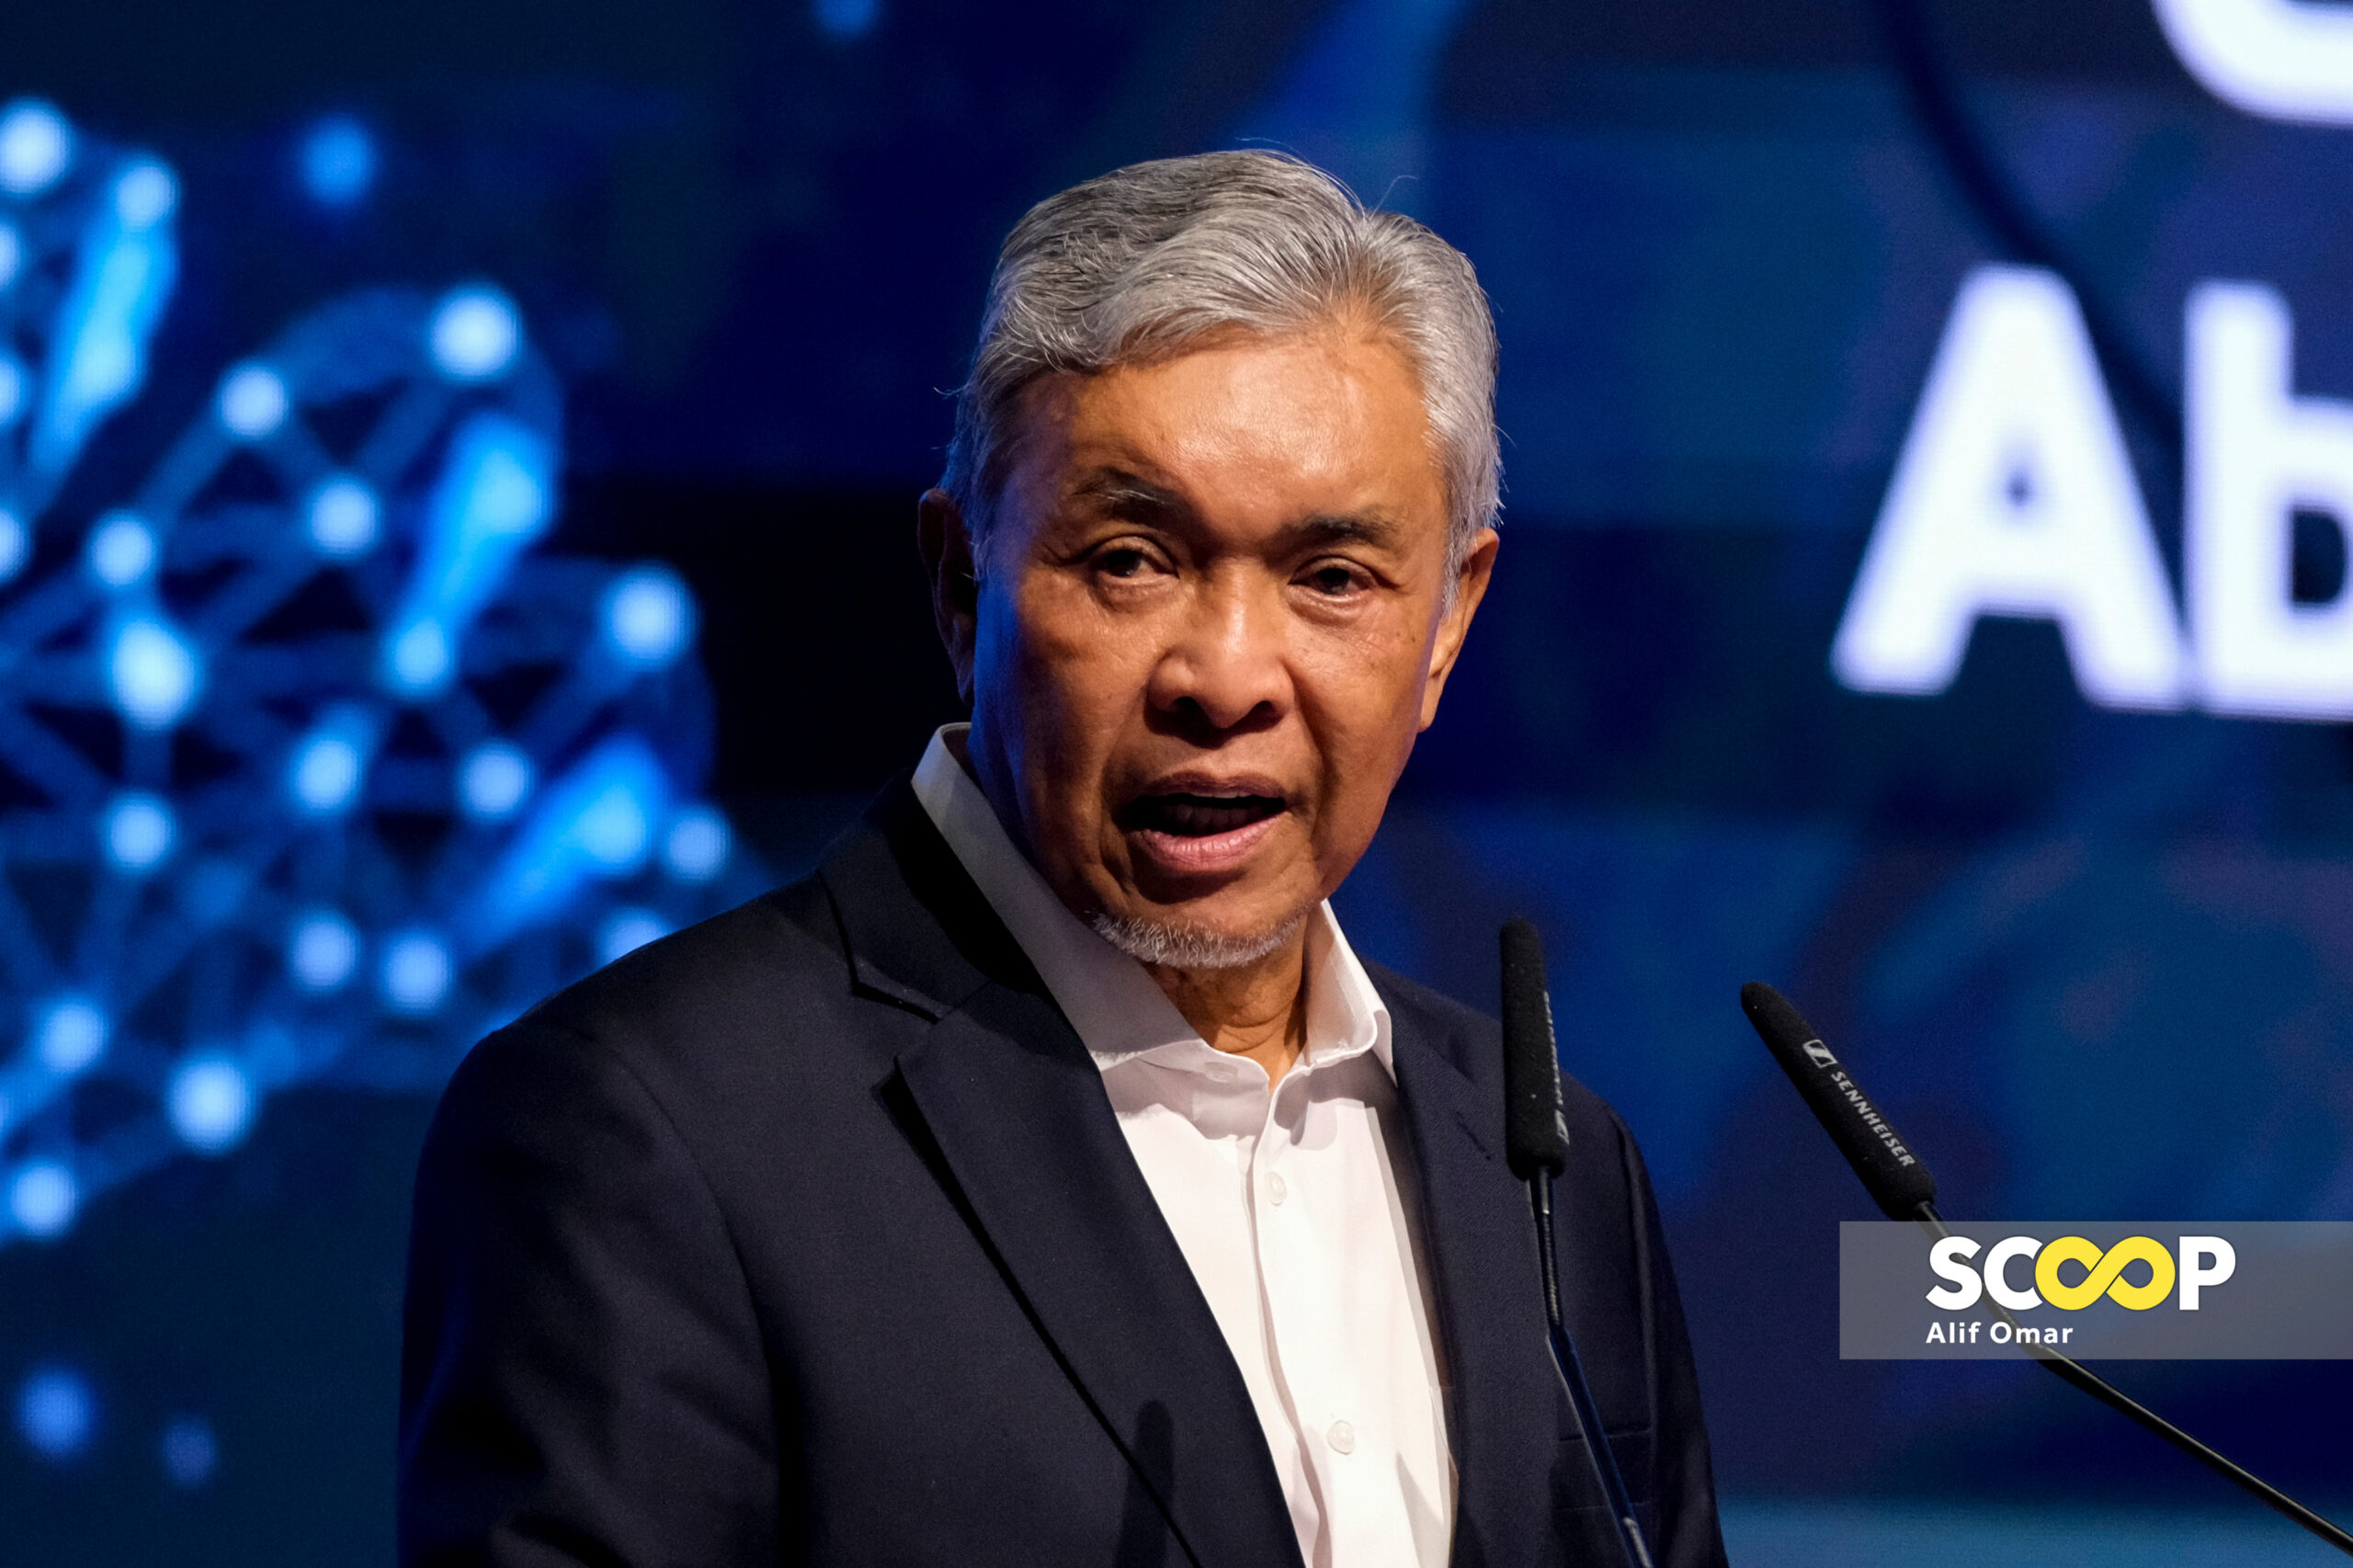 [UPDATED] BN’s loss in Kemaman not a referendum against unity govt: Zahid